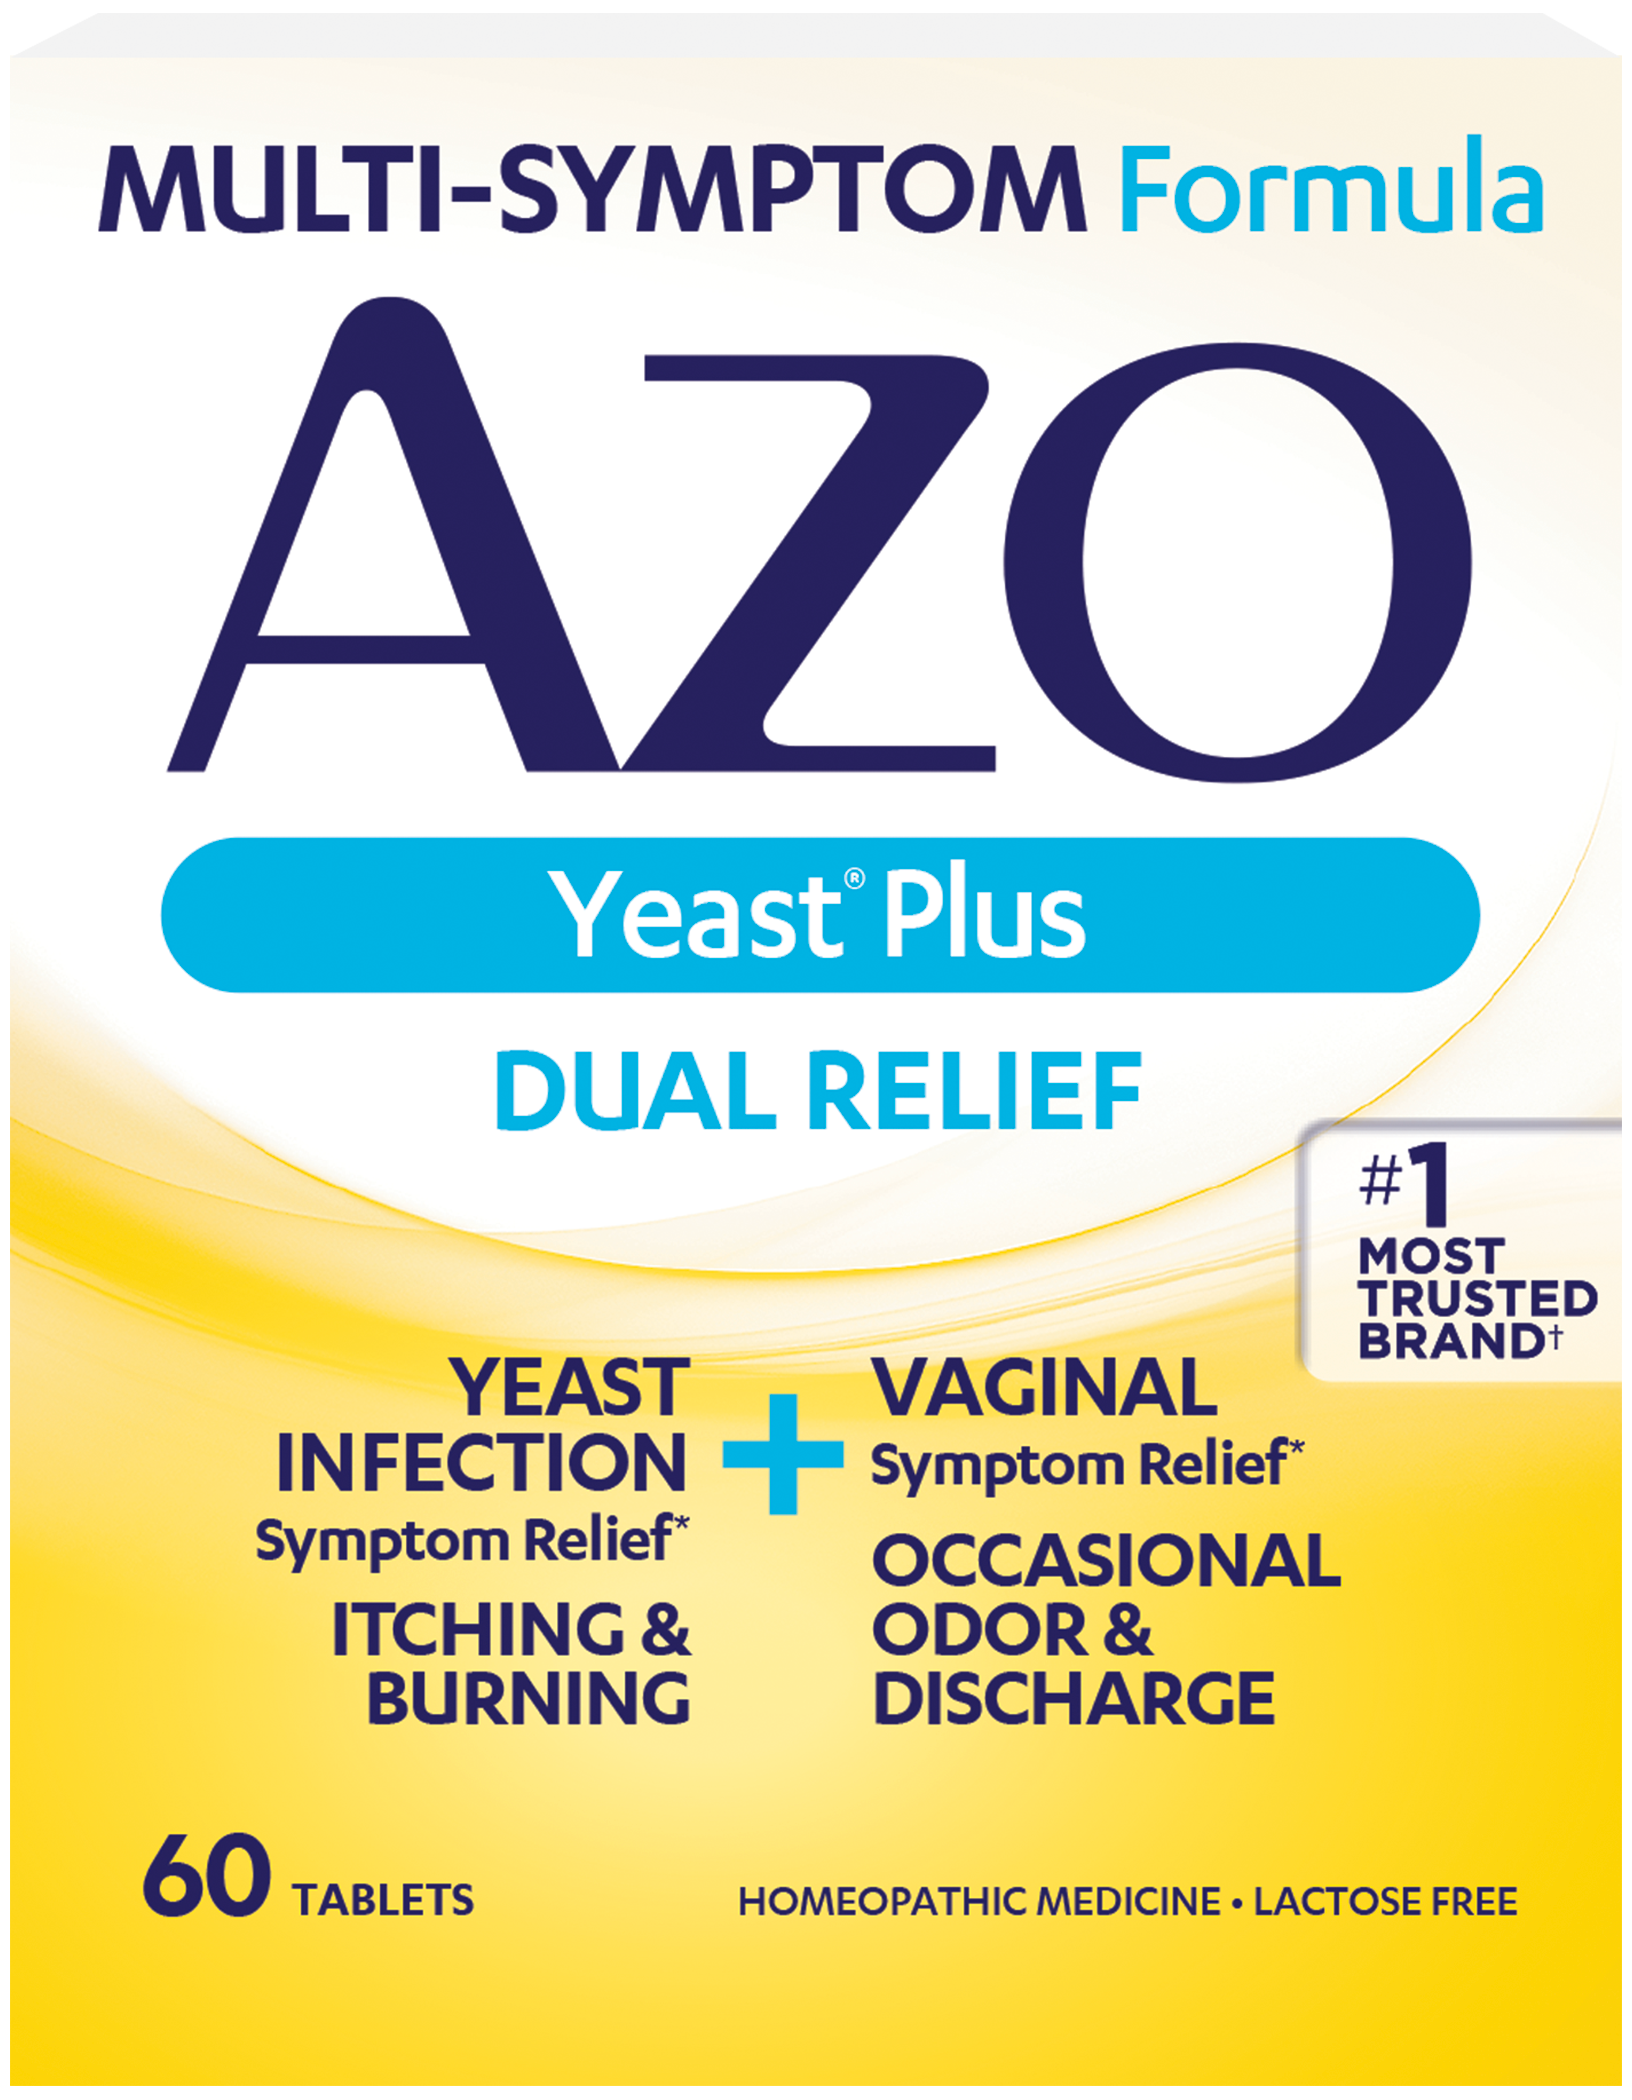 AZO Yeast® Plus Helps to Relieve Symptoms of Vaginal Infection*